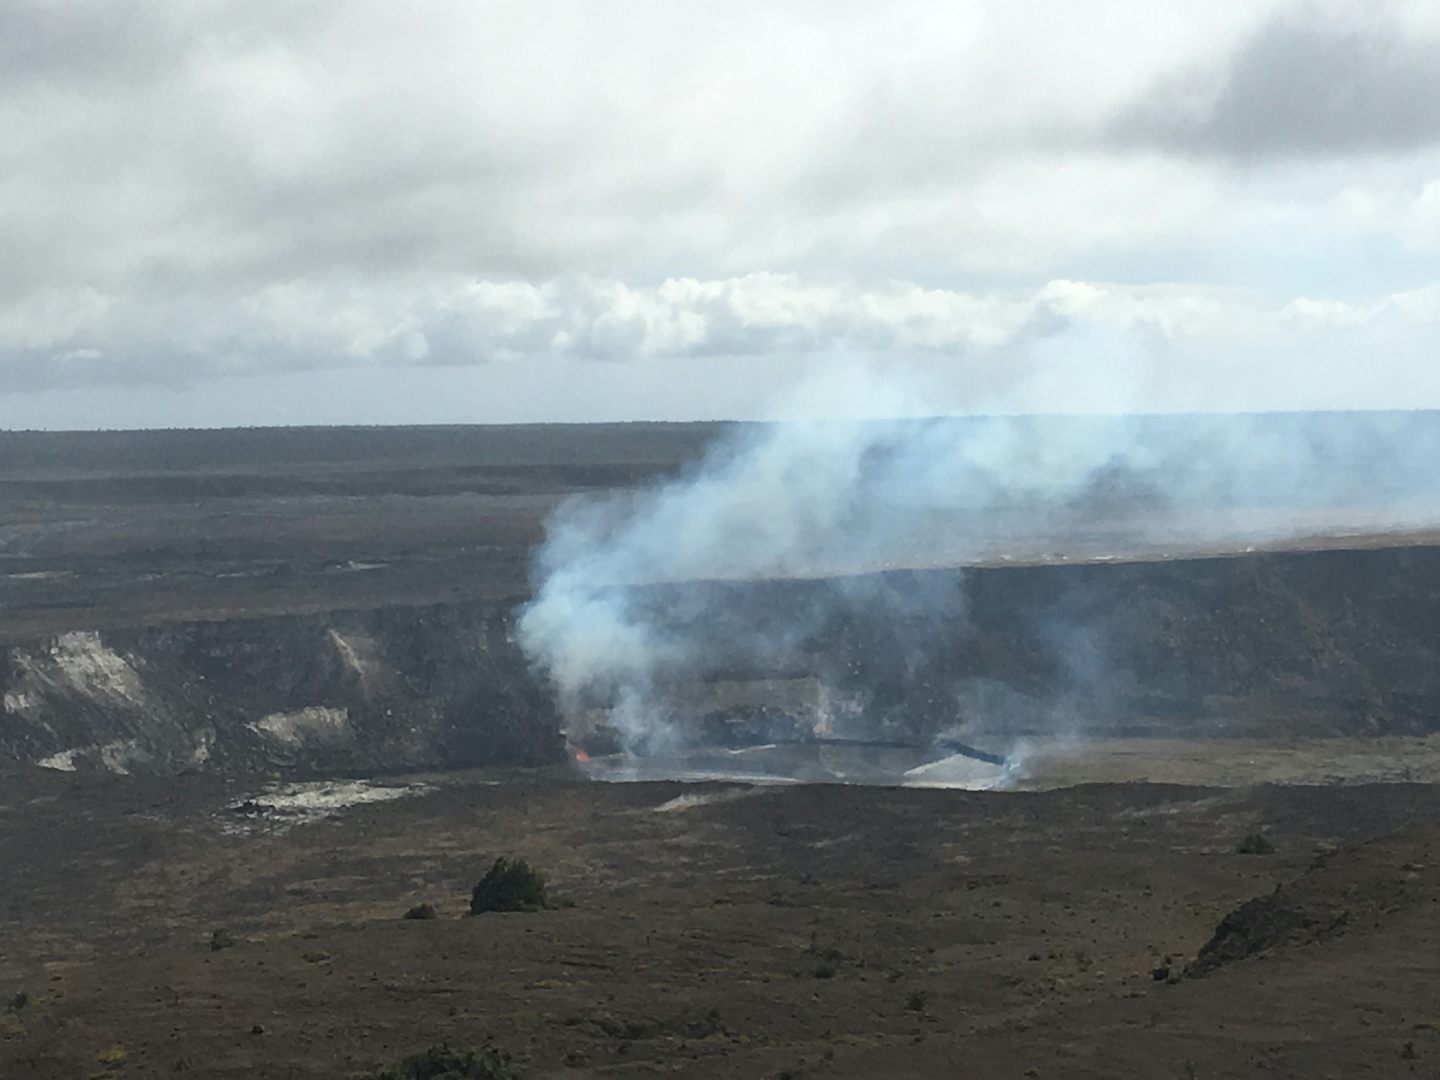 Klauea Crater on the Big Island, Hawaii, after a small eruption the day before